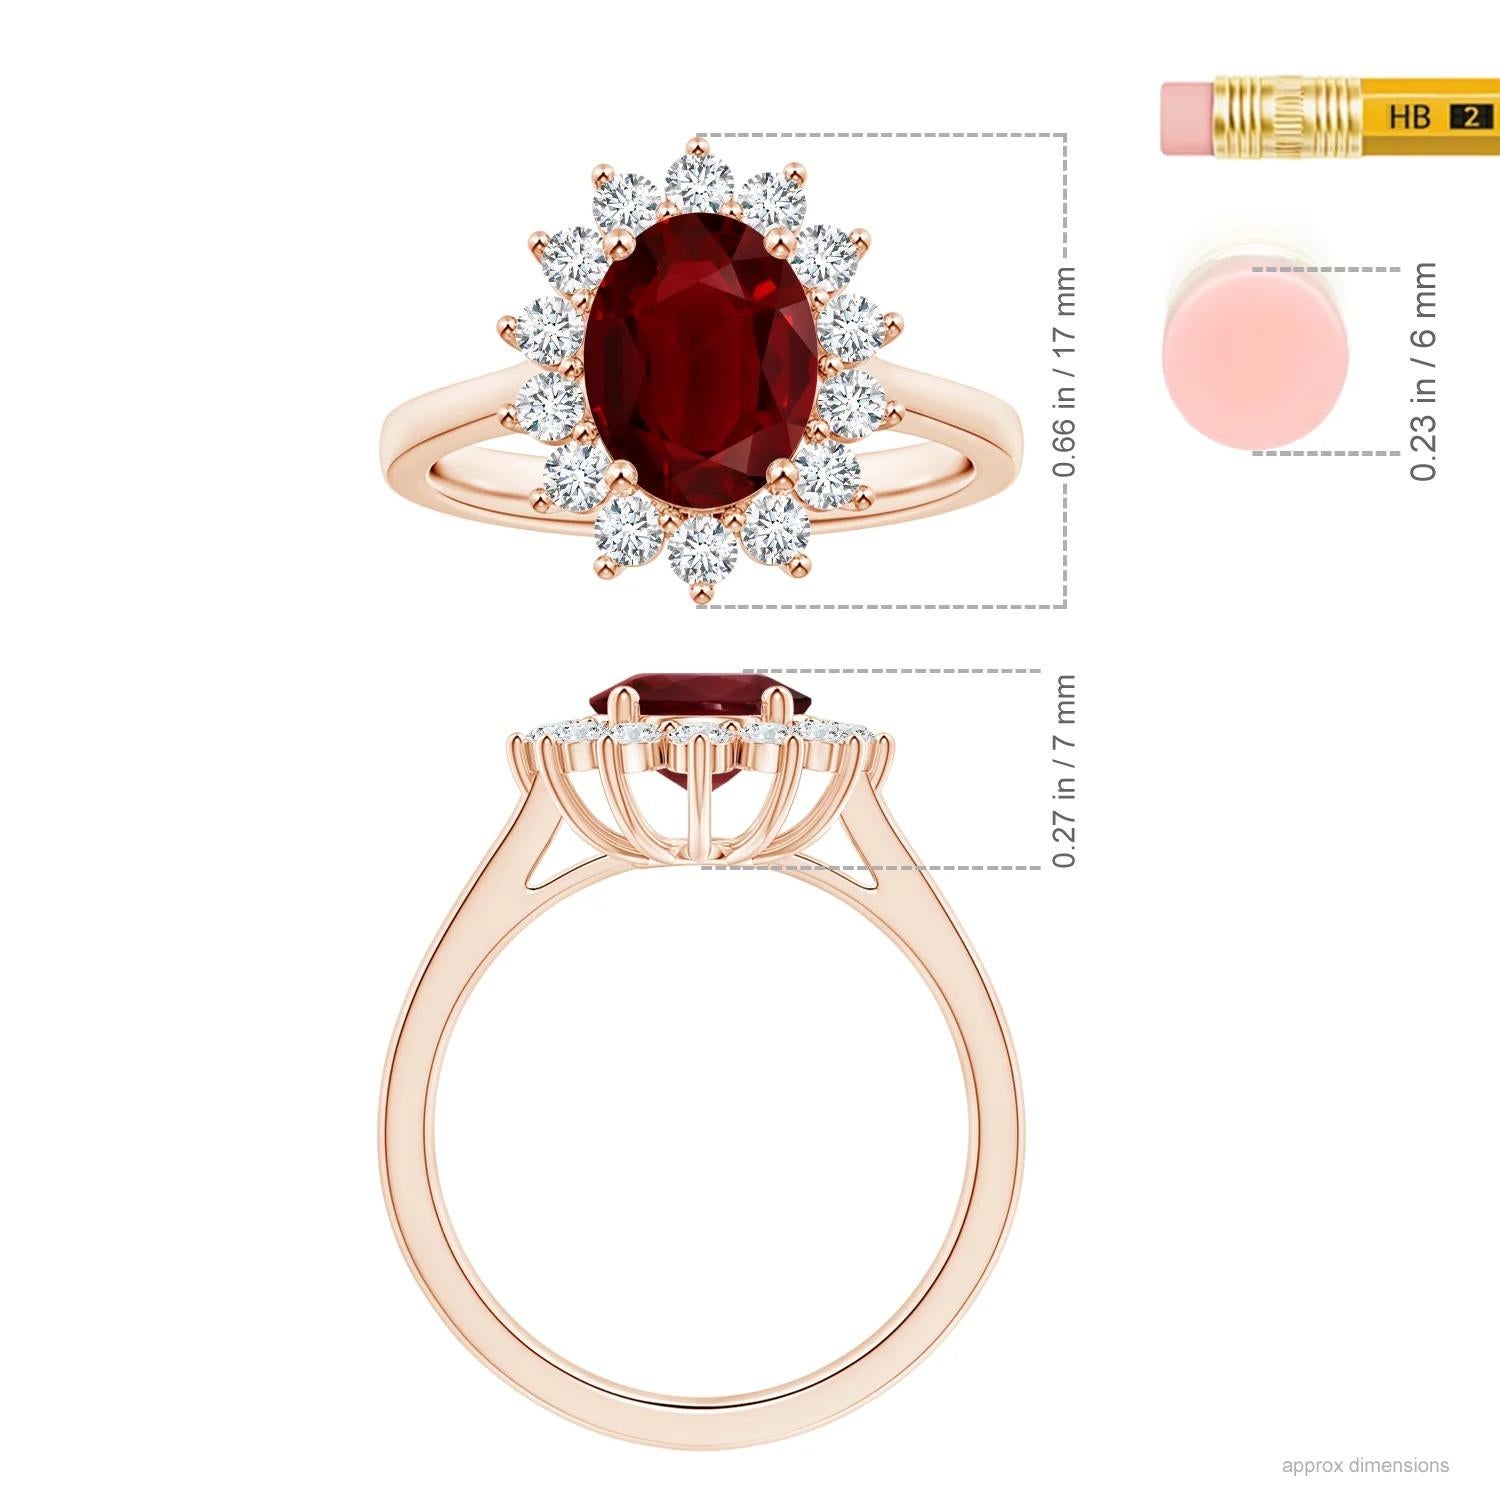 For Sale:  Angara Gia Certified Ruby Princess Diana Inspired Halo Ring in Rose Gold 5